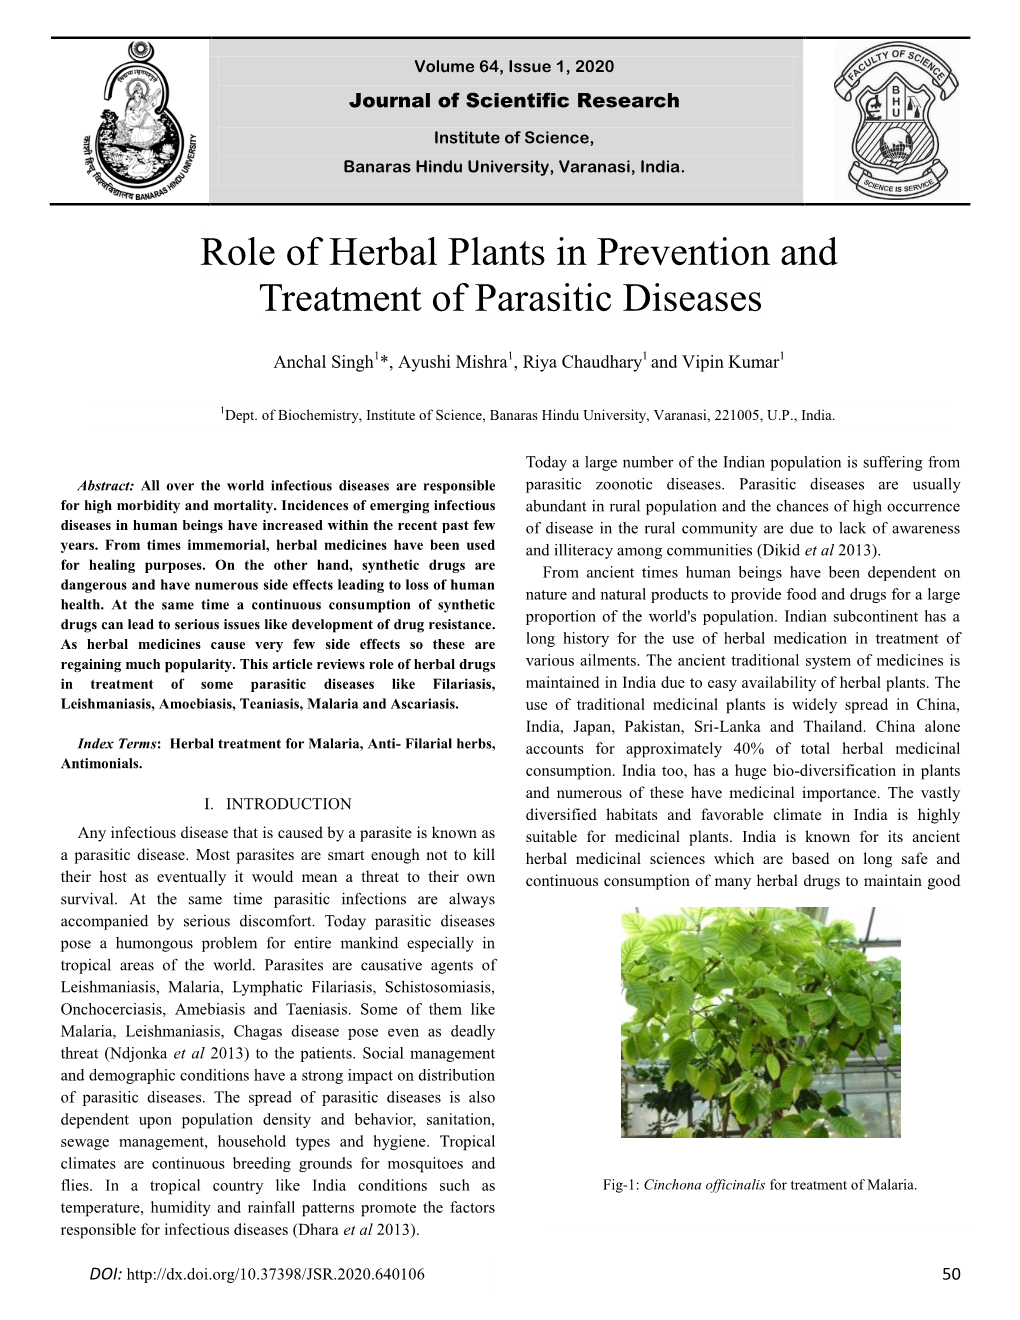 Role of Herbal Plants in Prevention and Treatment of Parasitic Diseases